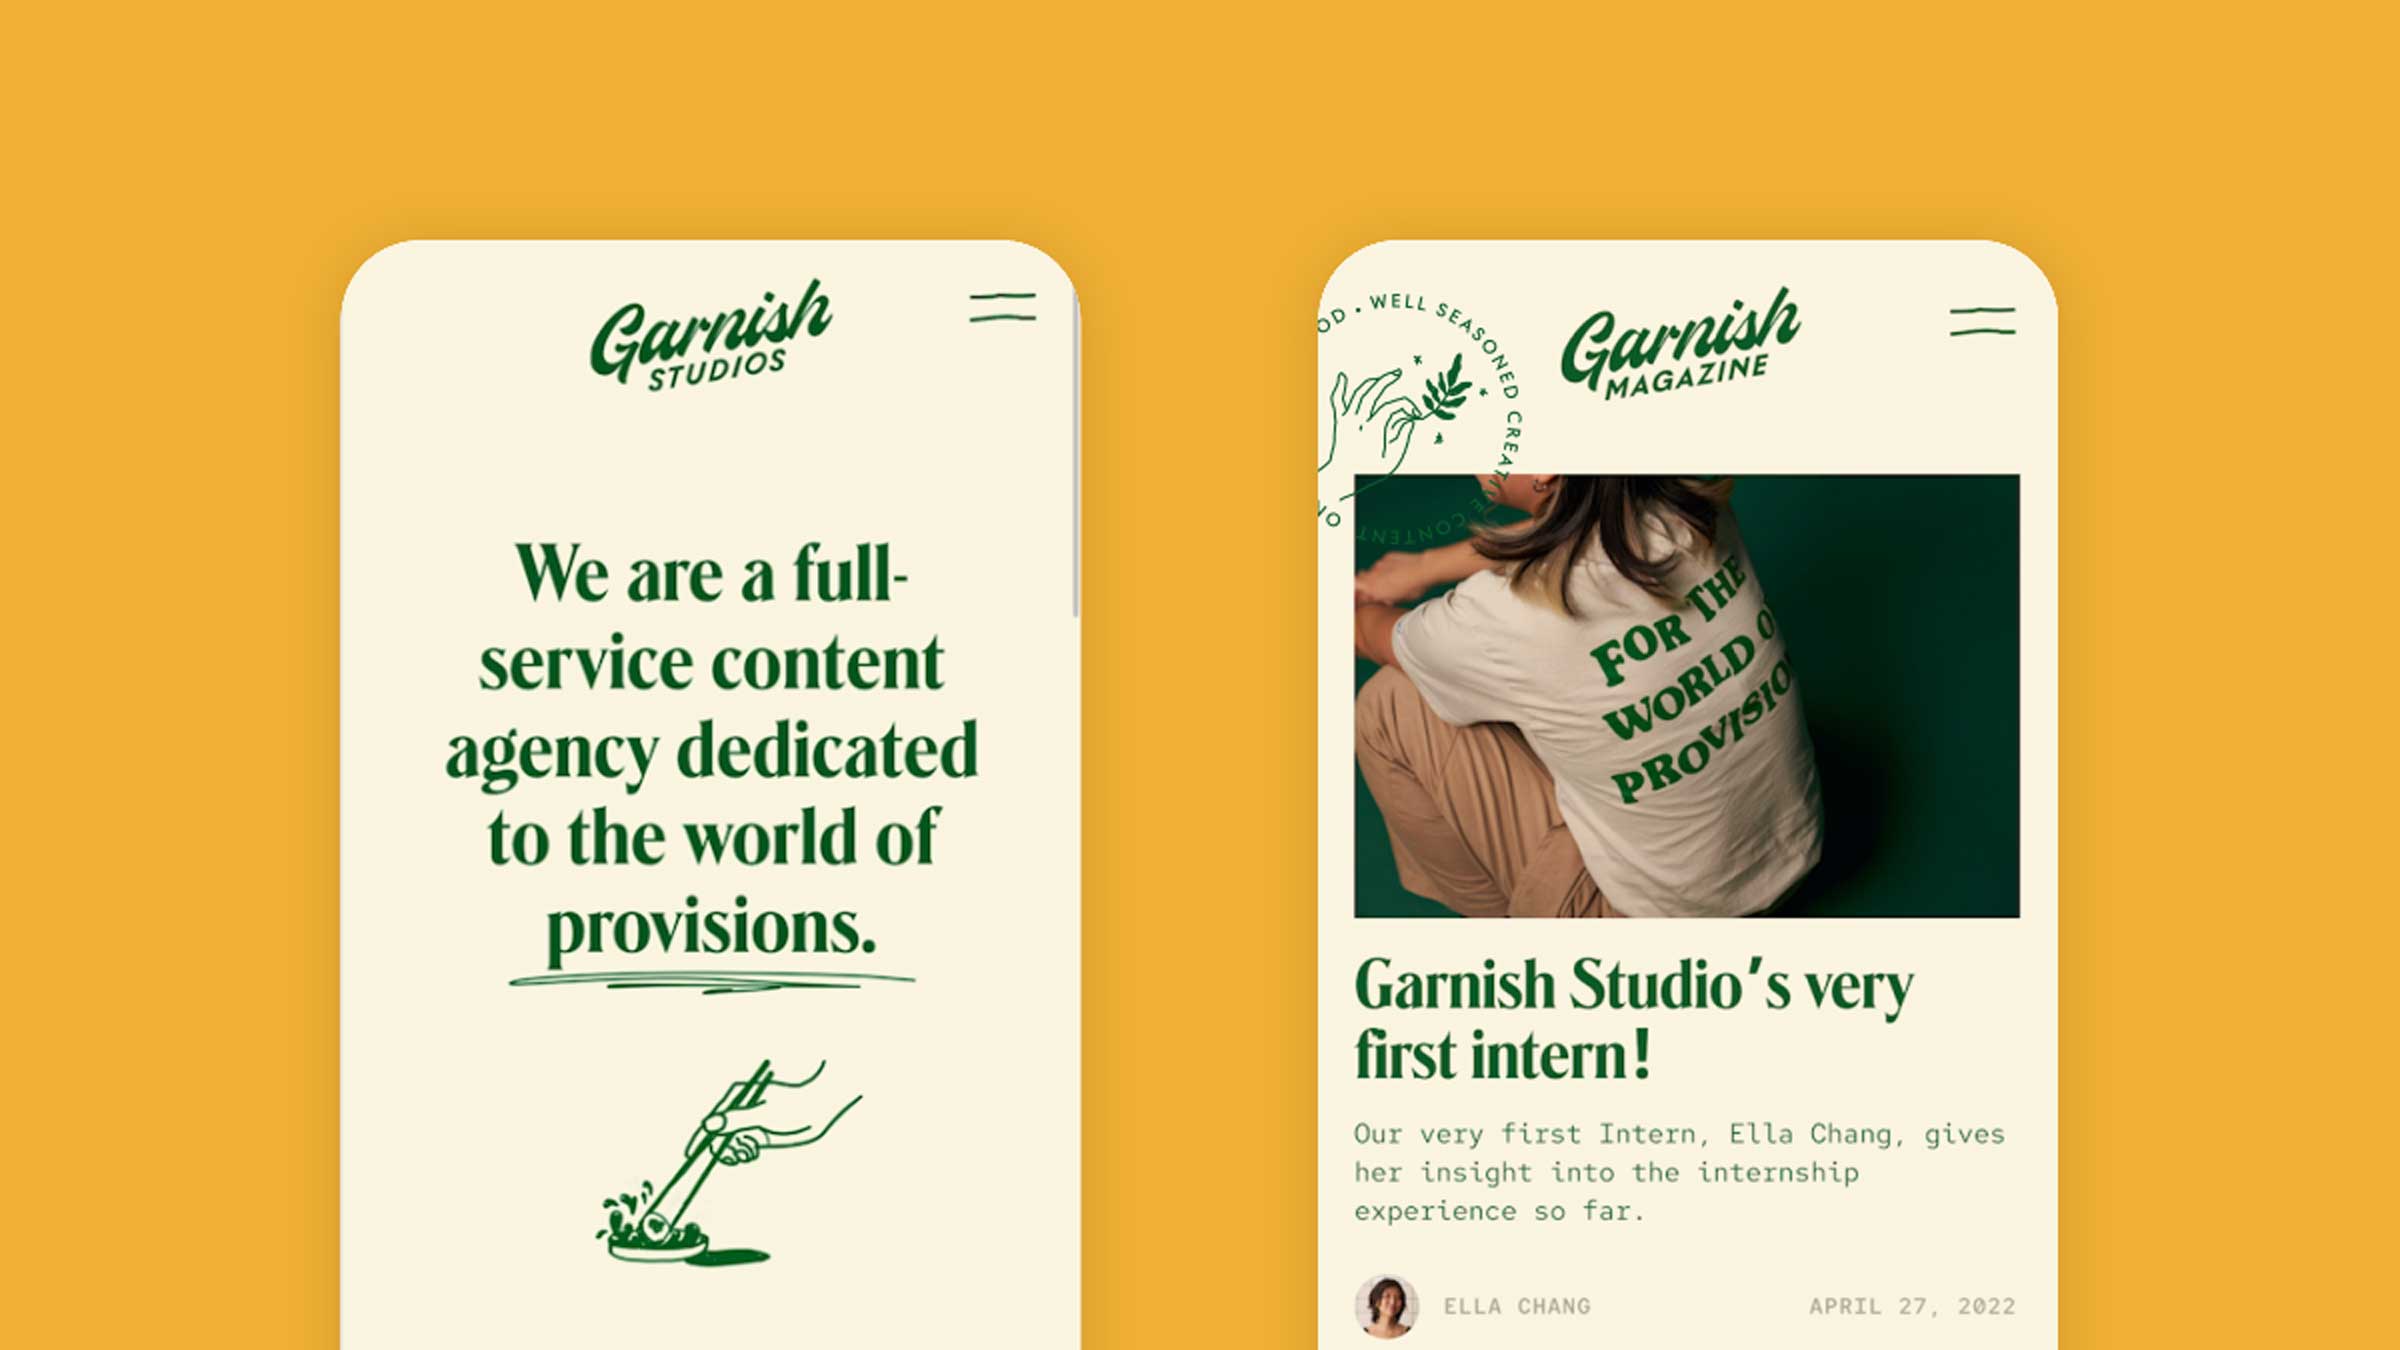 mobile design for the Garnish site - by Condensed